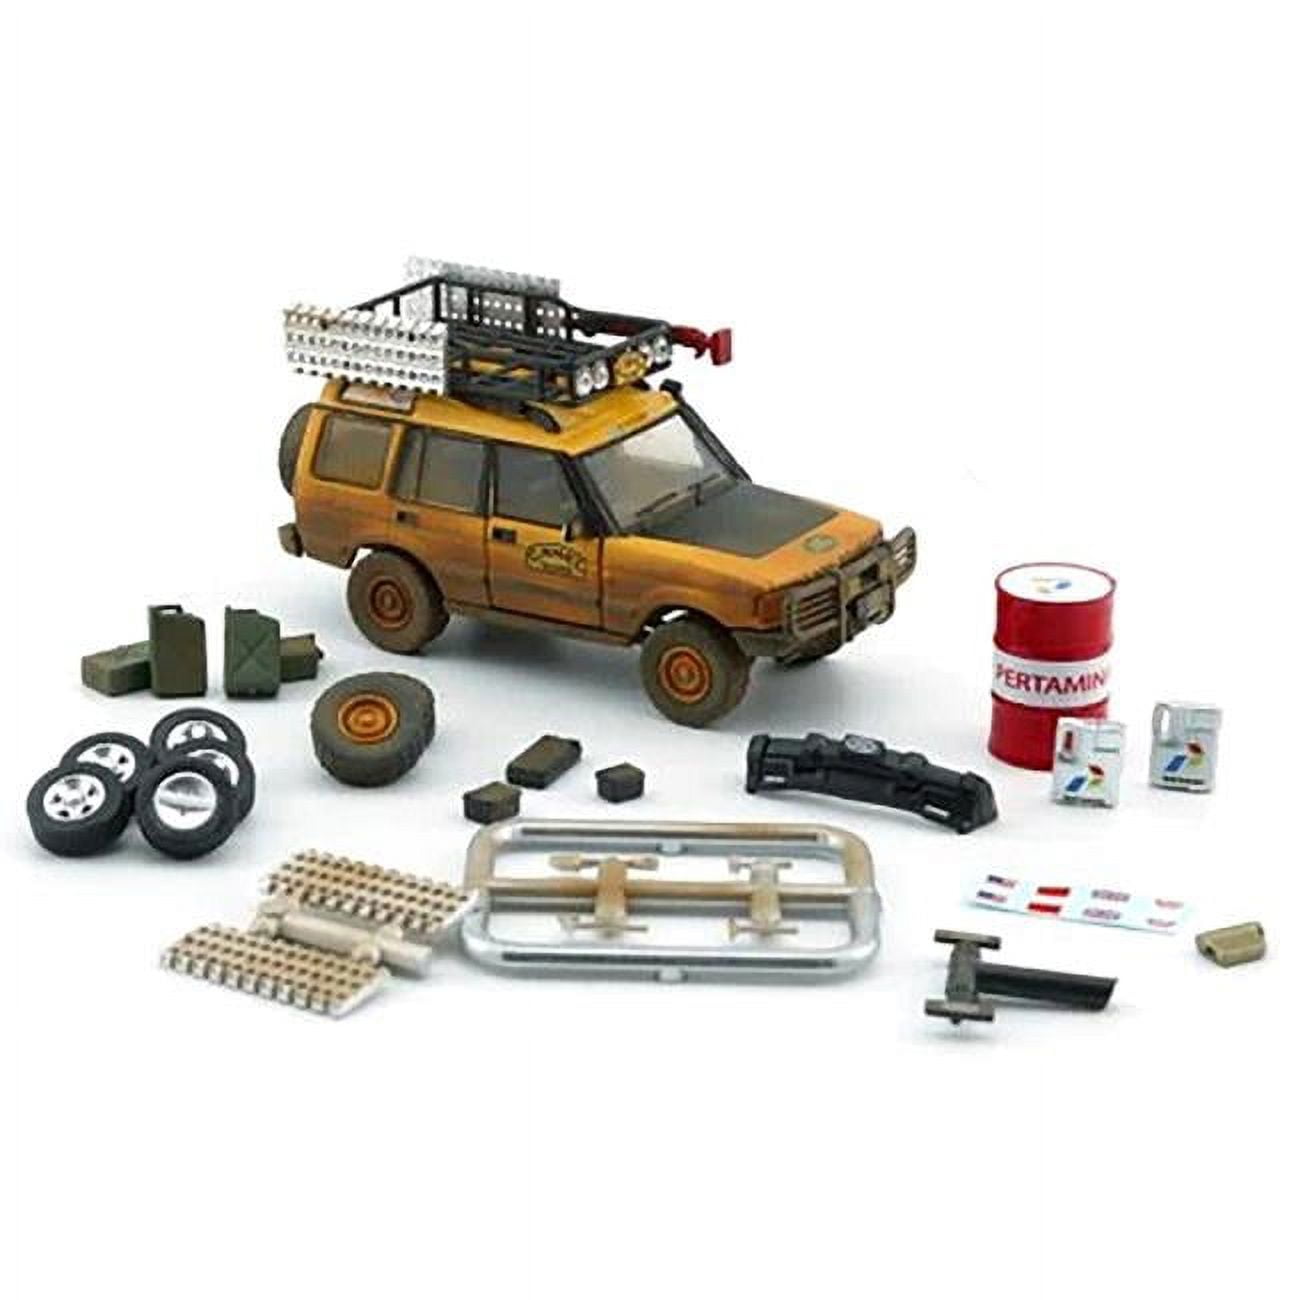 64B0282 Land Rover Discovery 1 RHD Right Hand Drive Camel Trophy Yellow Dirty Mud Version with 1 by 64 Scale Diecast Model Car - 2016 Piece -  BM Creations